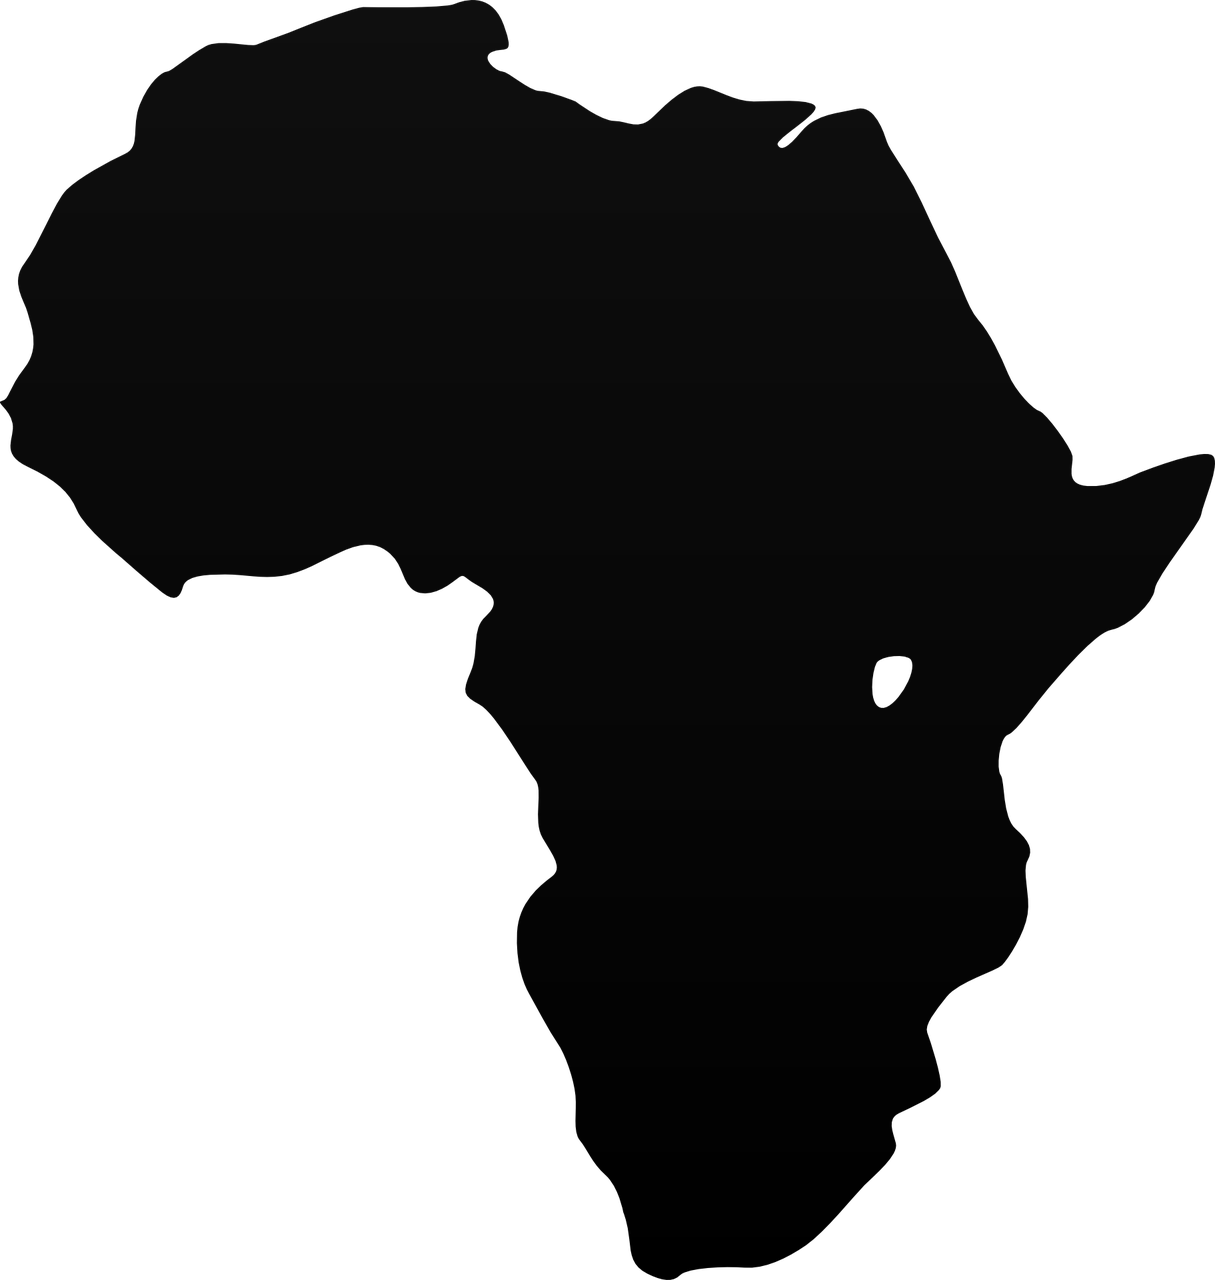 africa map of the world world free photo